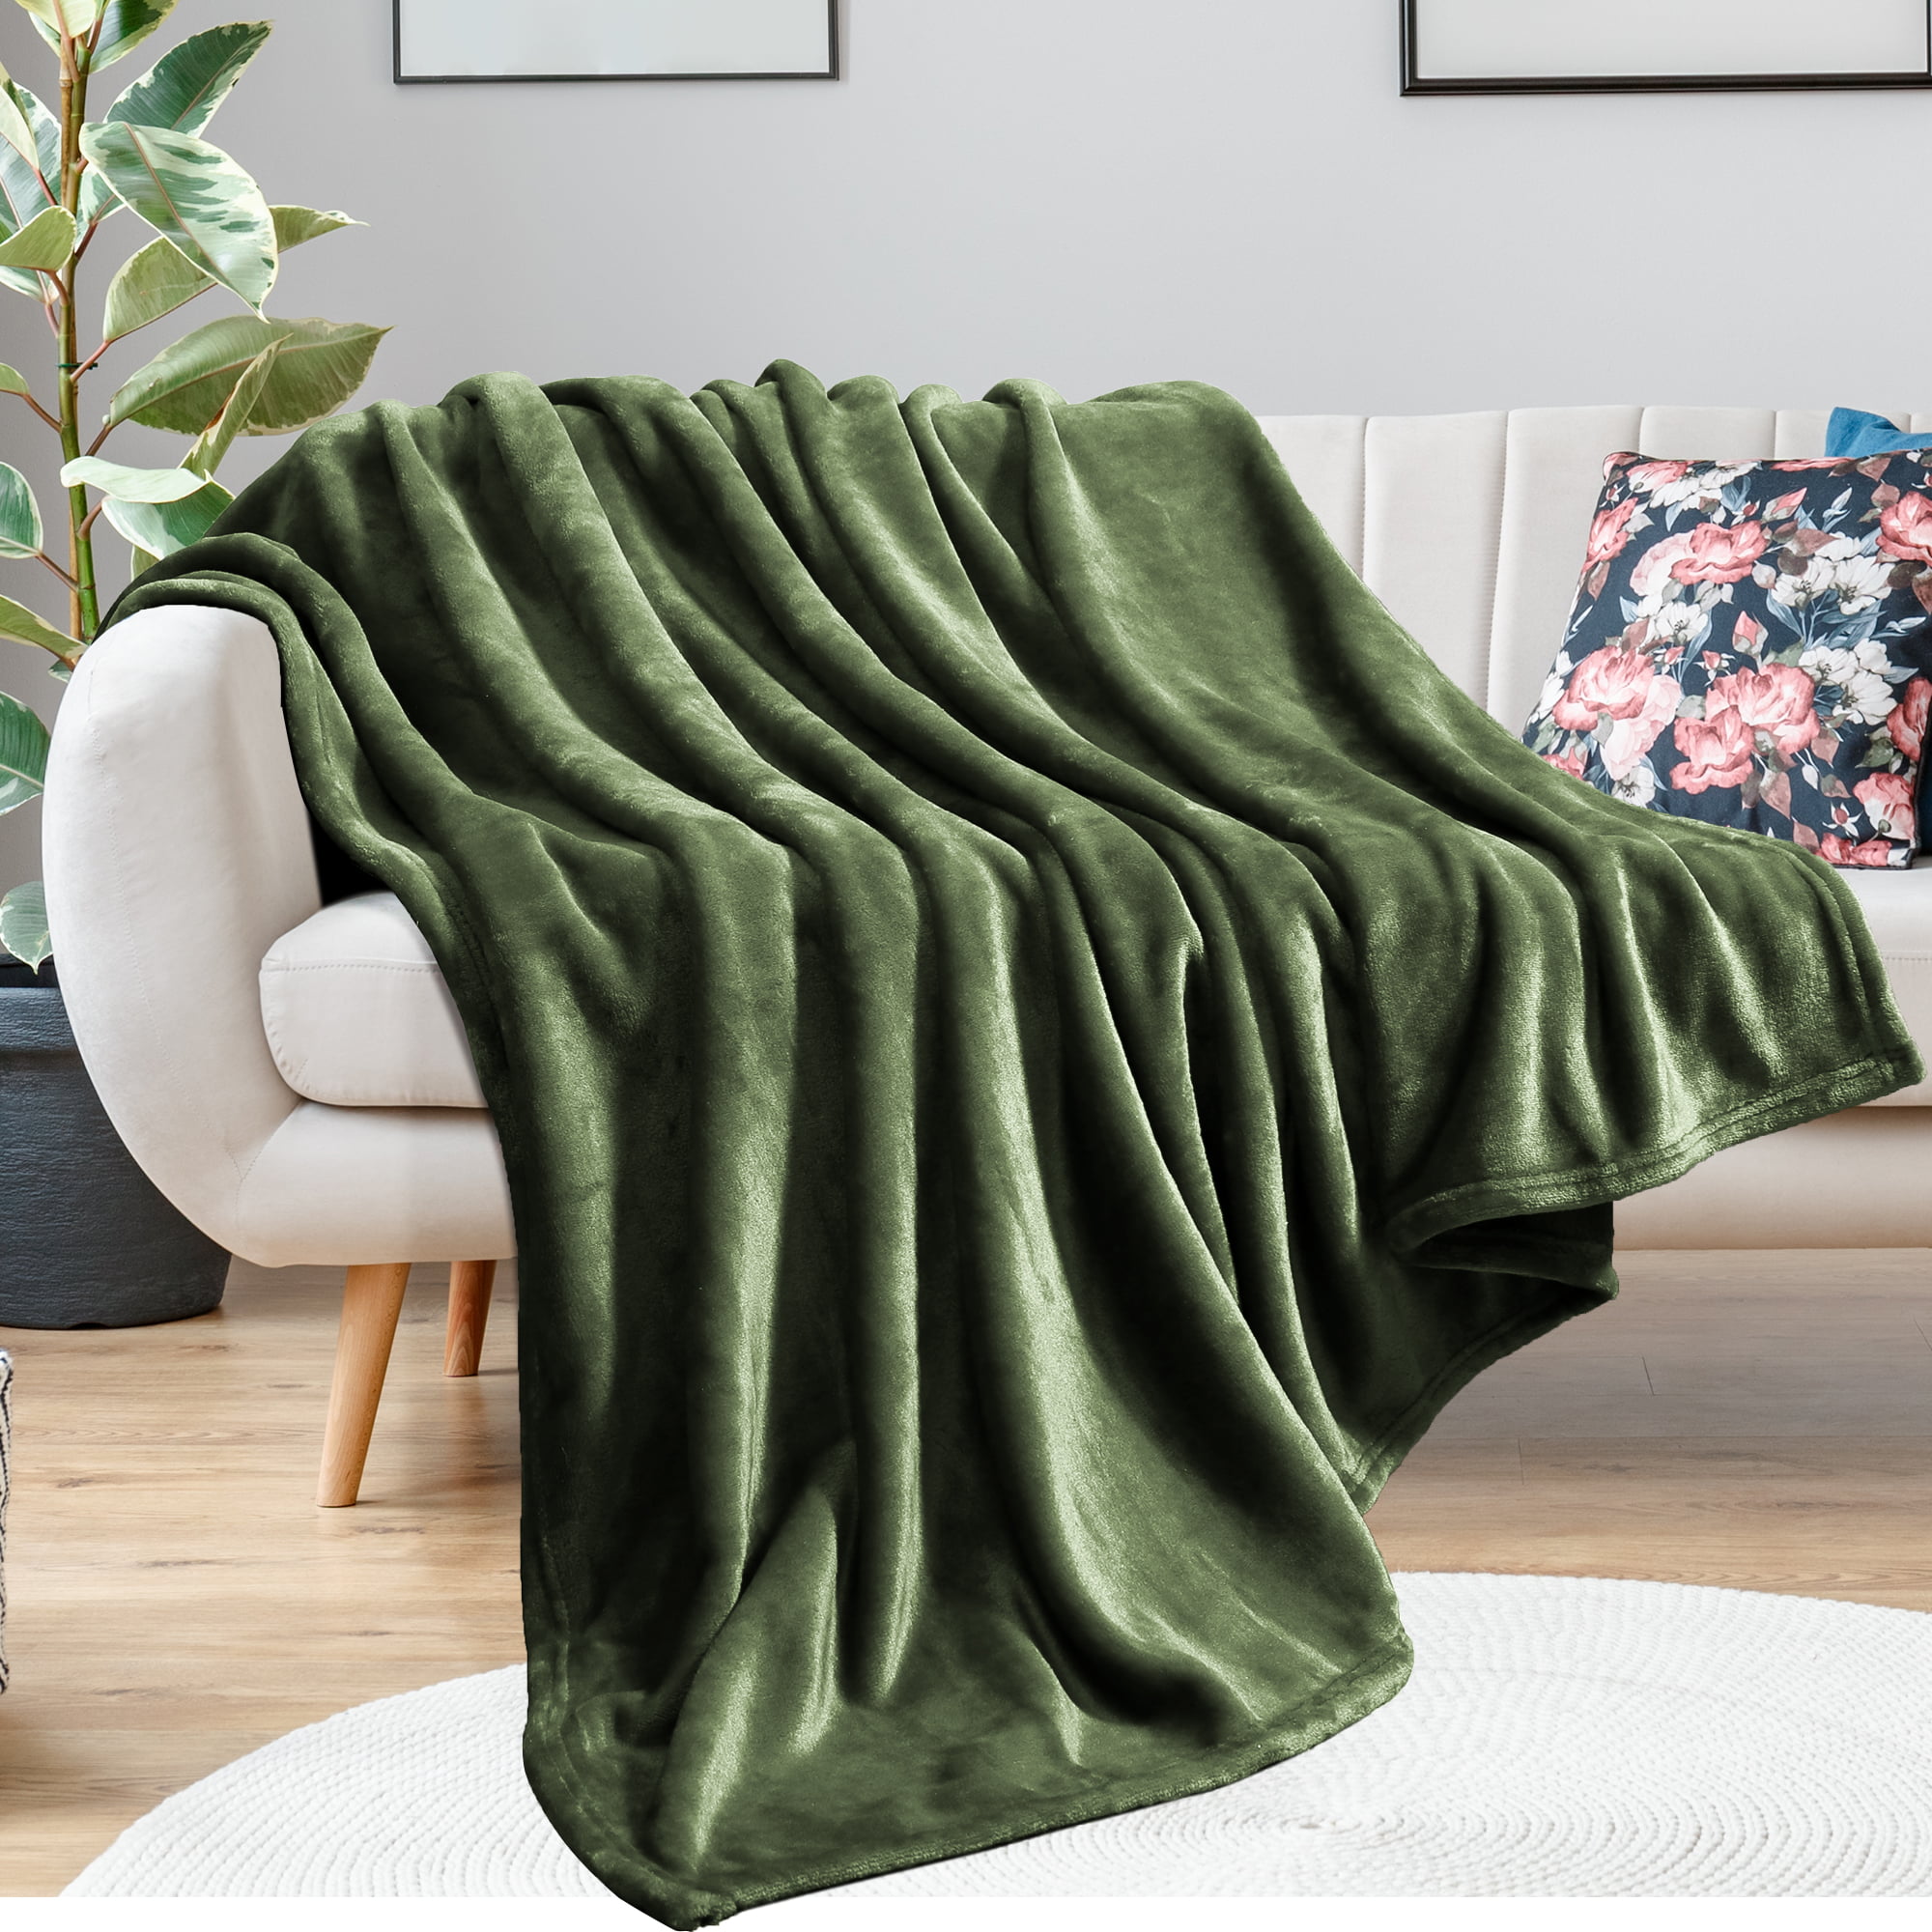 Flannel Fleece Blanket Soft Throw Blankets Fuzzy Plush Lightweight for  Couch Sofa Traveling, 50 x 60 inches, Army Green